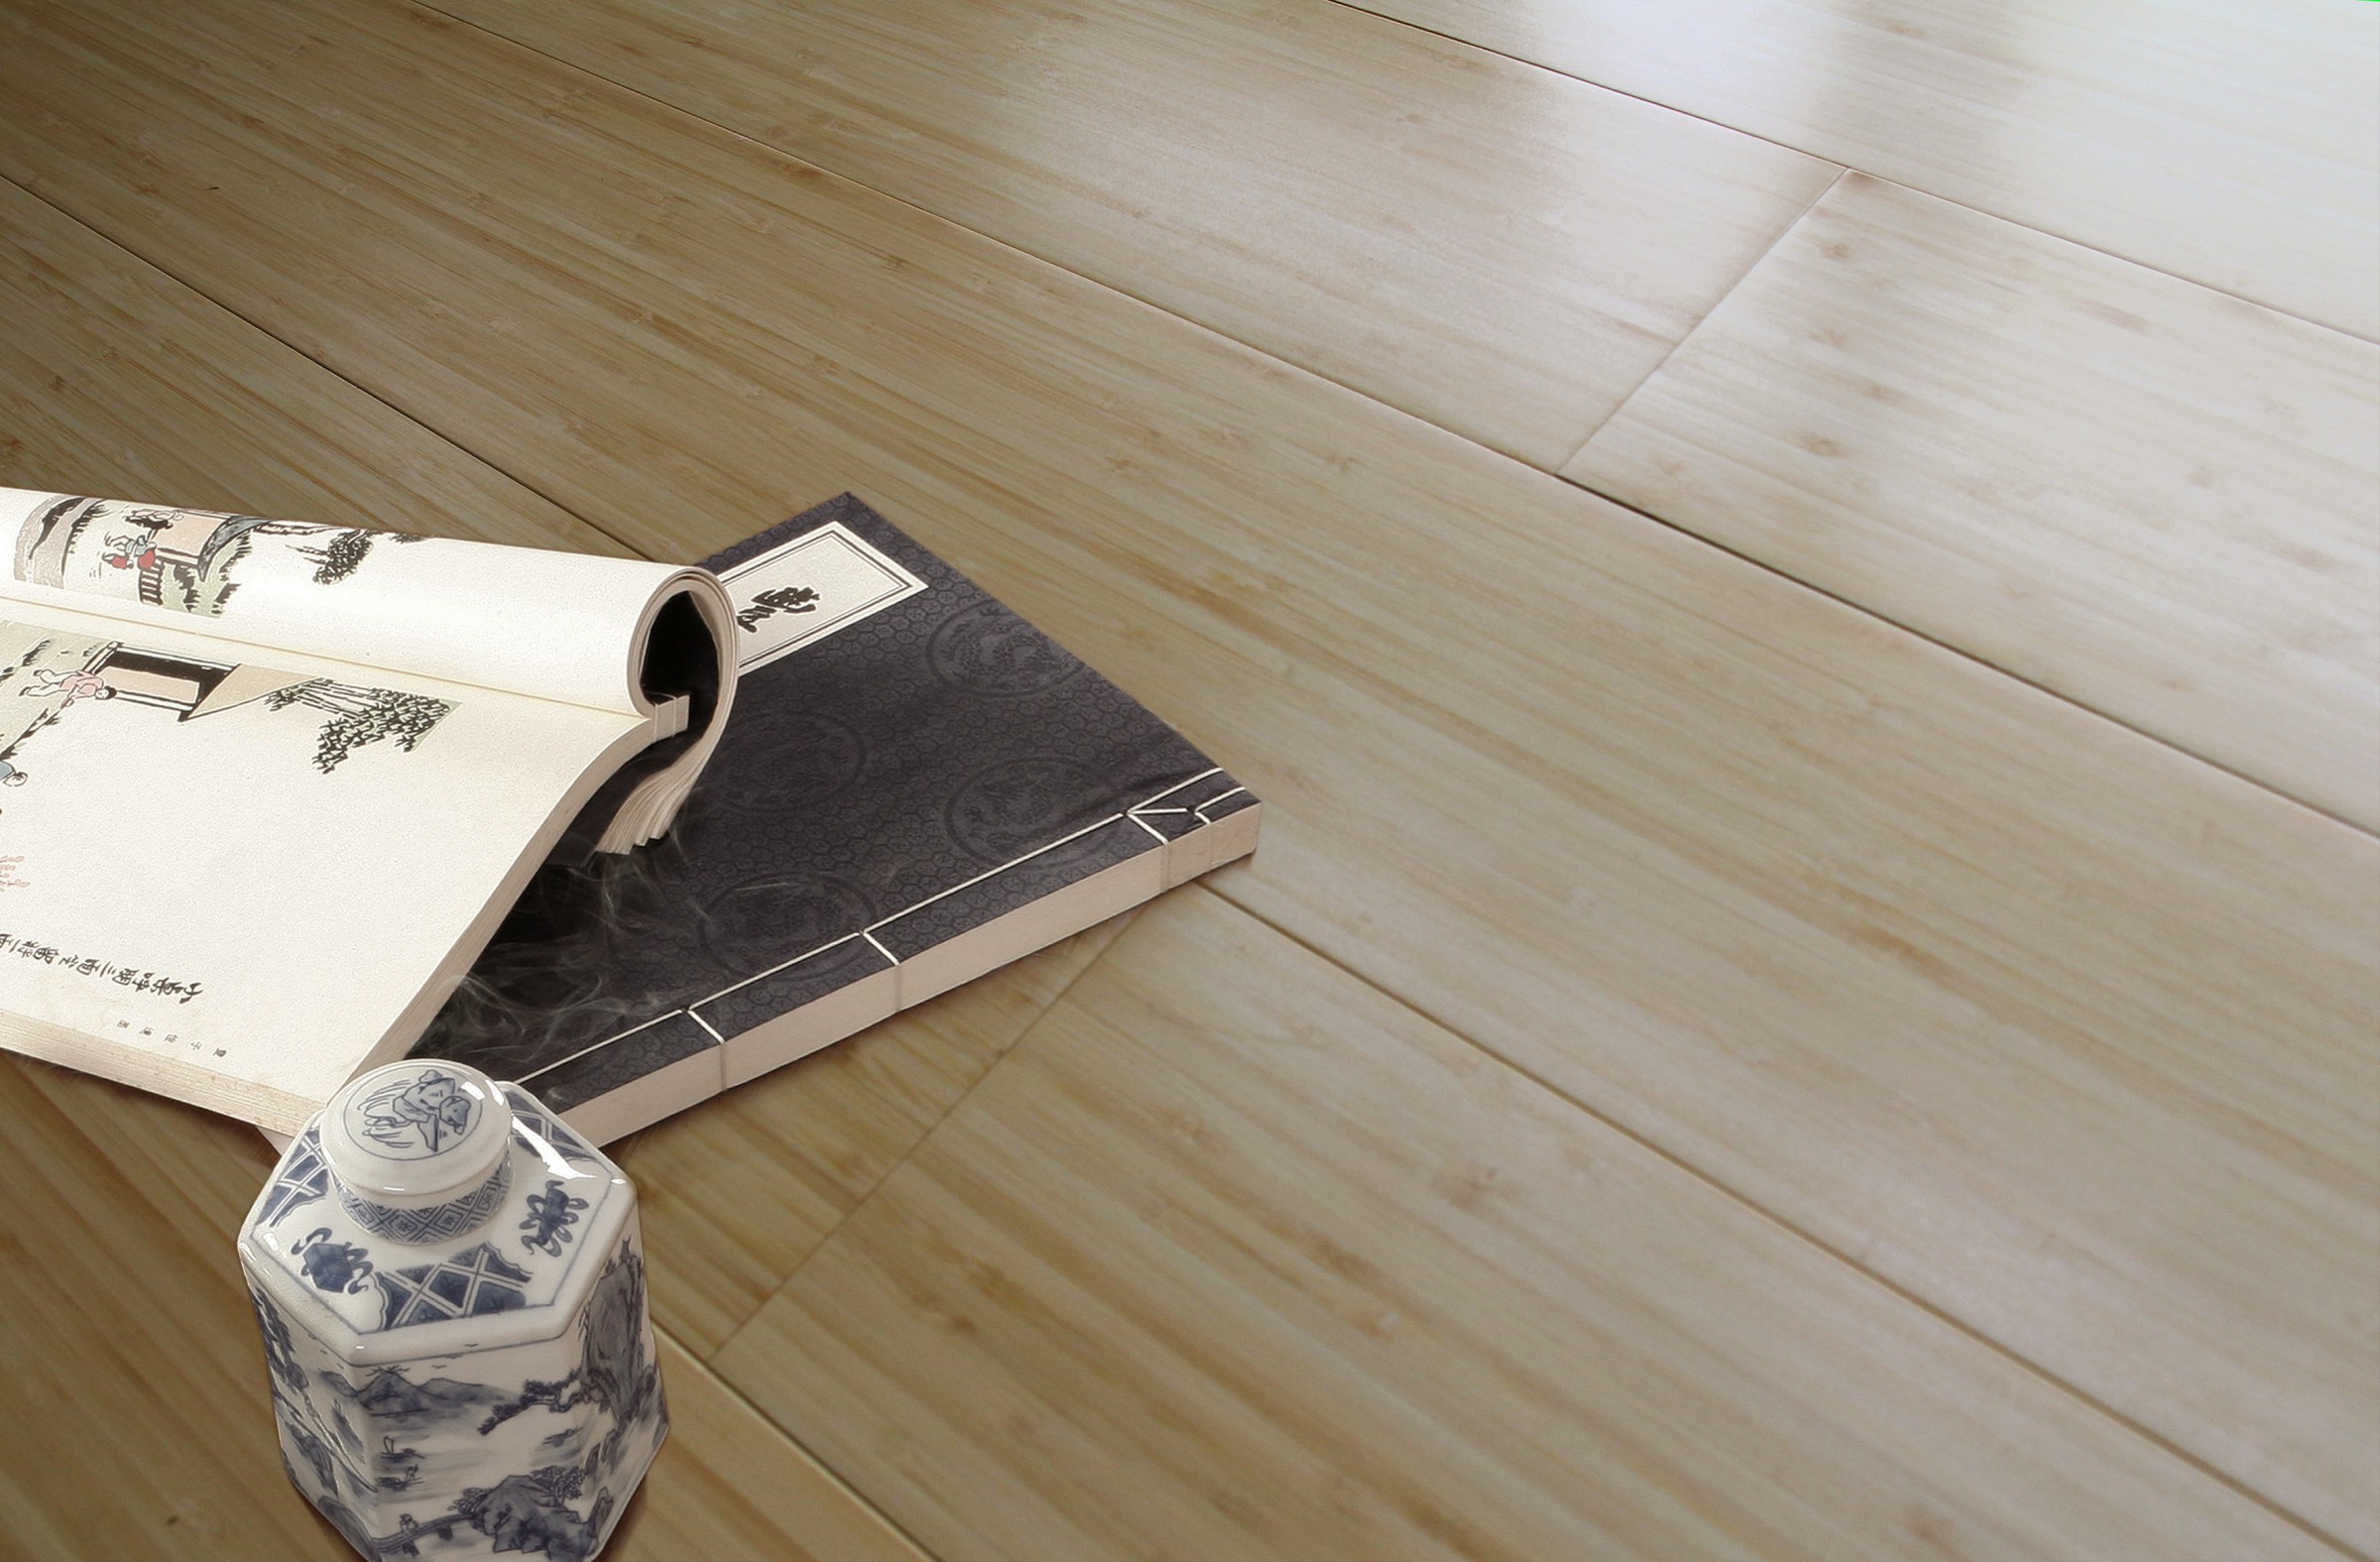 Dasso commercial bamboo flooring CE/FSC certificate